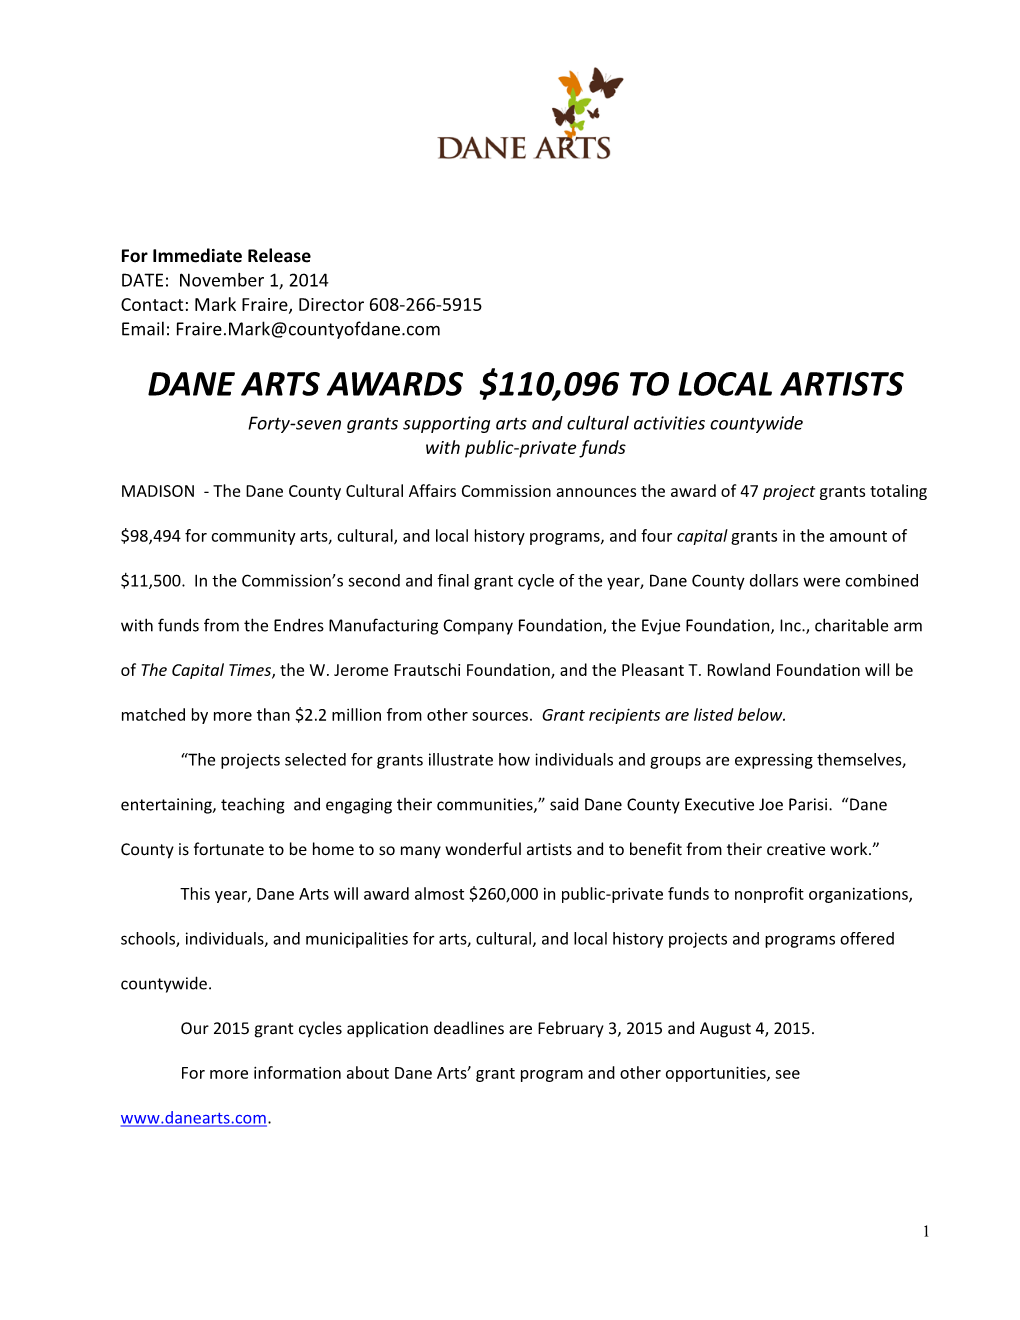 DANE ARTS AWARDS $110,096 to LOCAL ARTISTS Forty-Seven Grants Supporting Arts and Cultural Activities Countywide with Public-Private Funds